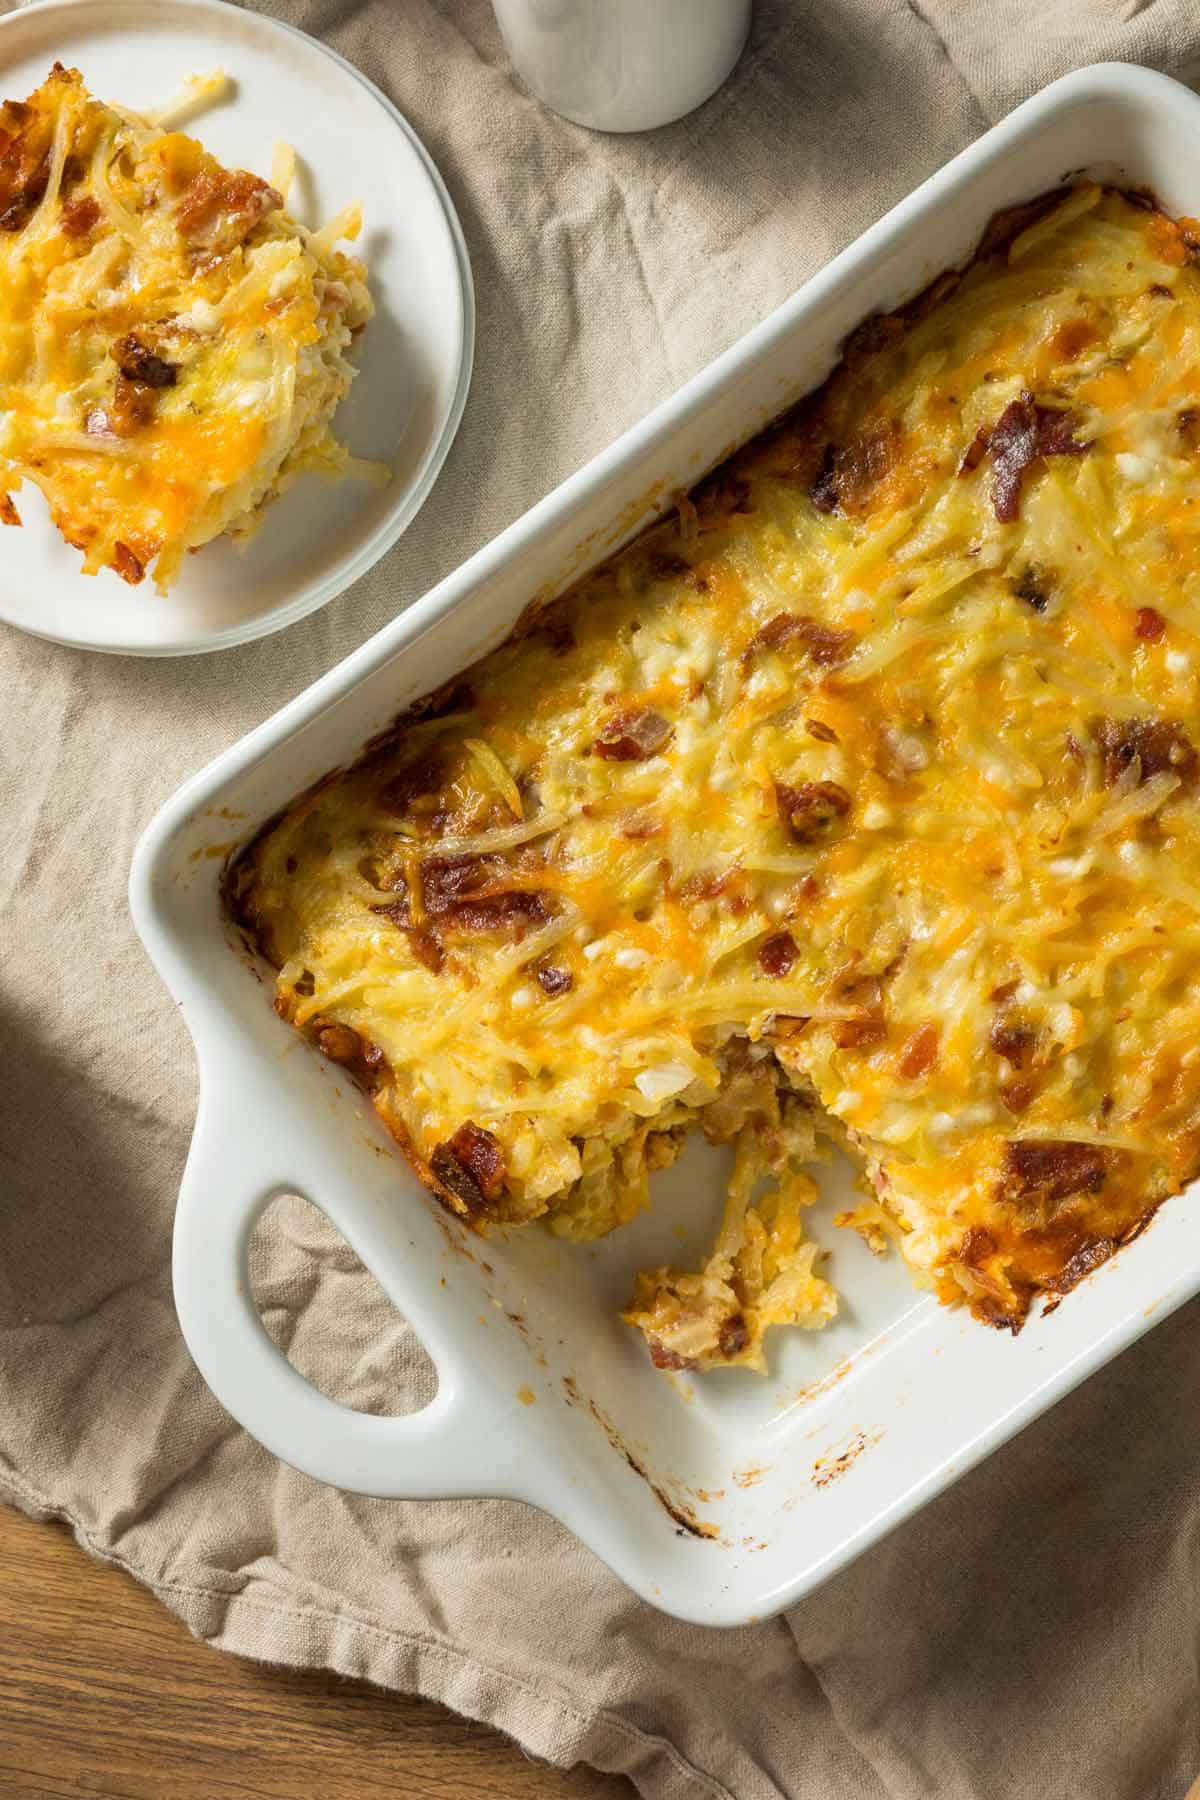 Breakfast casserole in a casserole pan with a serving of the casserole on a small plate in the background.